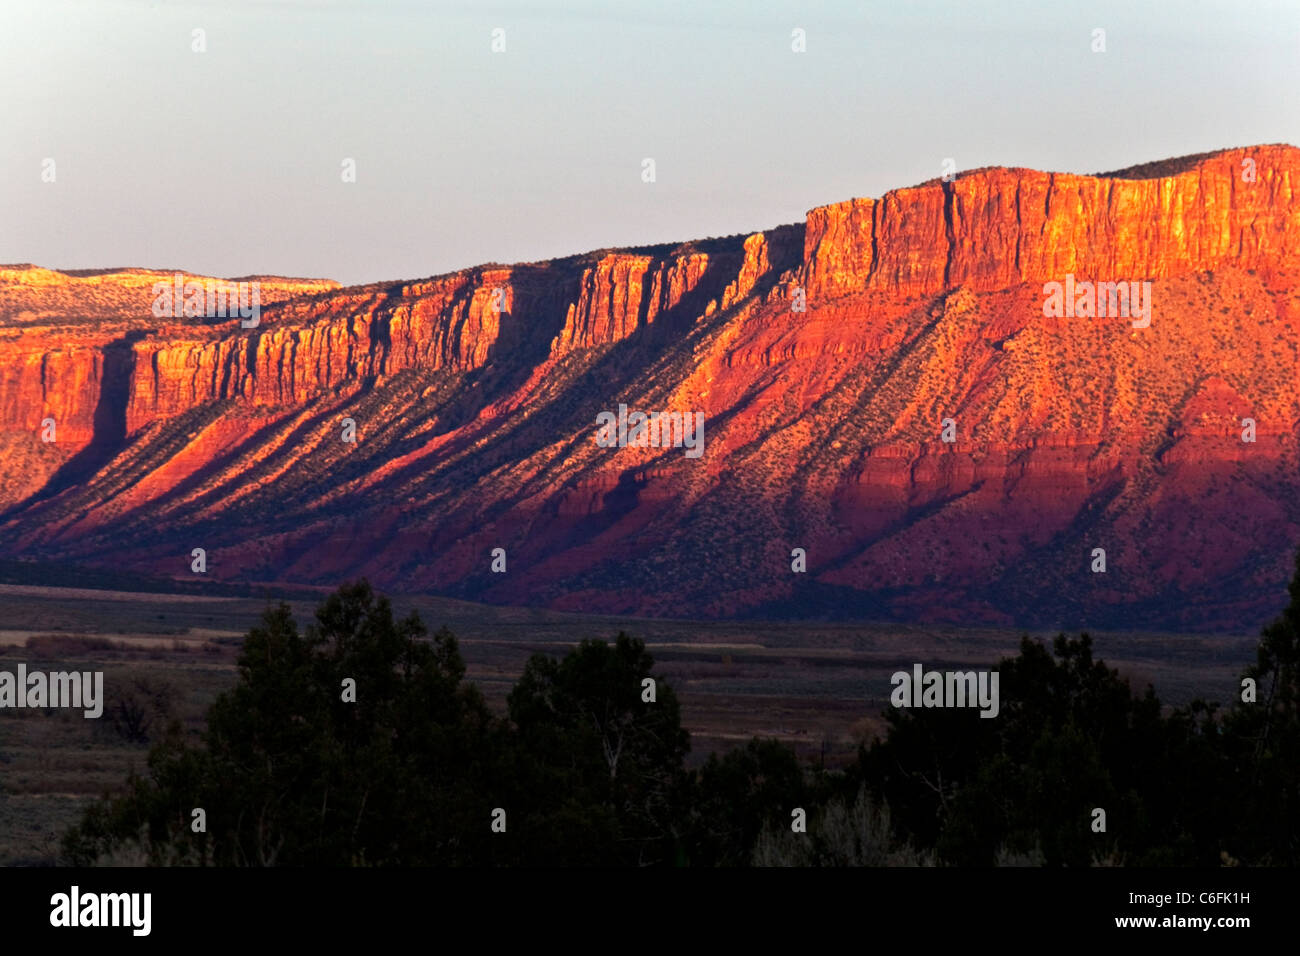 Sunset and the red cliffs of Paradox Valley in southwestern Colorado. Stock Photo